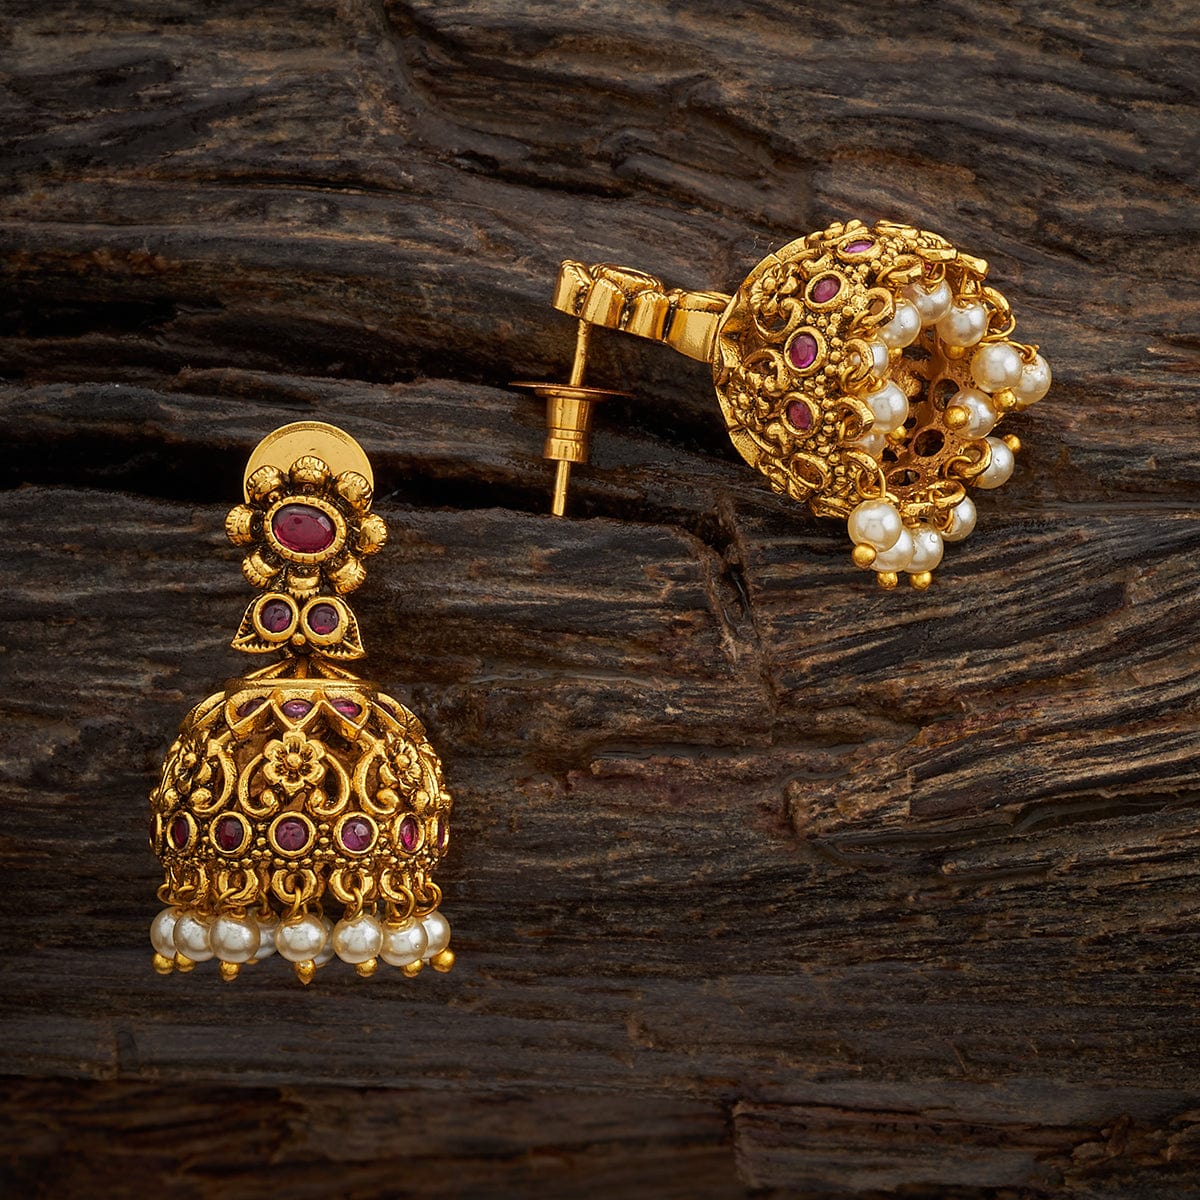 Amrapali Jewels - Style our traditional gold earrings with a bold gold,  diamond and tourmaline necklace. #AmrapaliJewels #Heirloom #IndianArtefacts  #Traditions #HandmadeJewelry #GoldJewellery #Maharani #MaharanisOfIndia  #AntiqueJewelry | Facebook